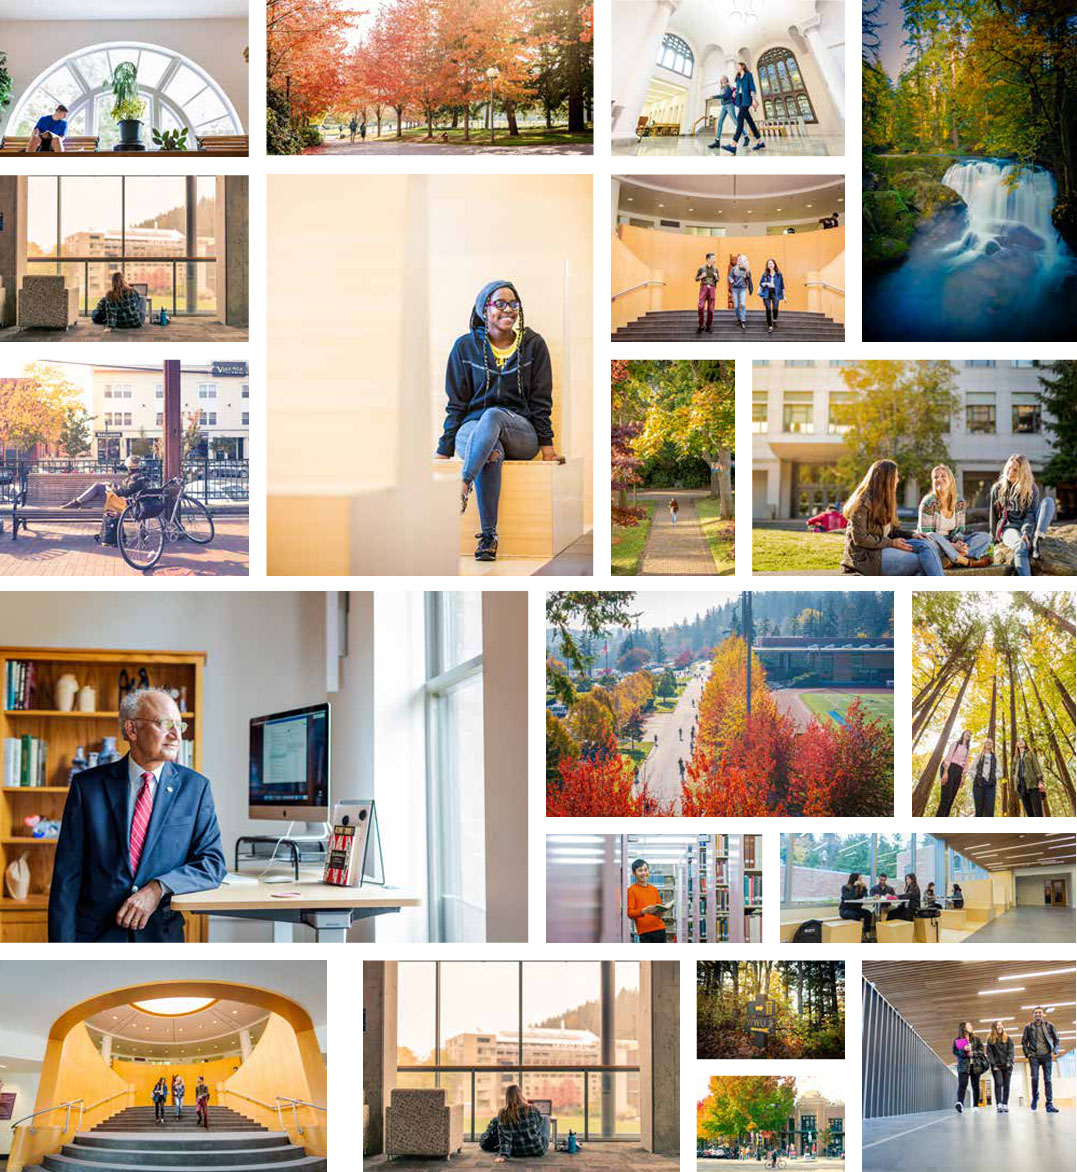 samples of photography, all featuring lots of natural light, fall foliage, and diverse groups of students